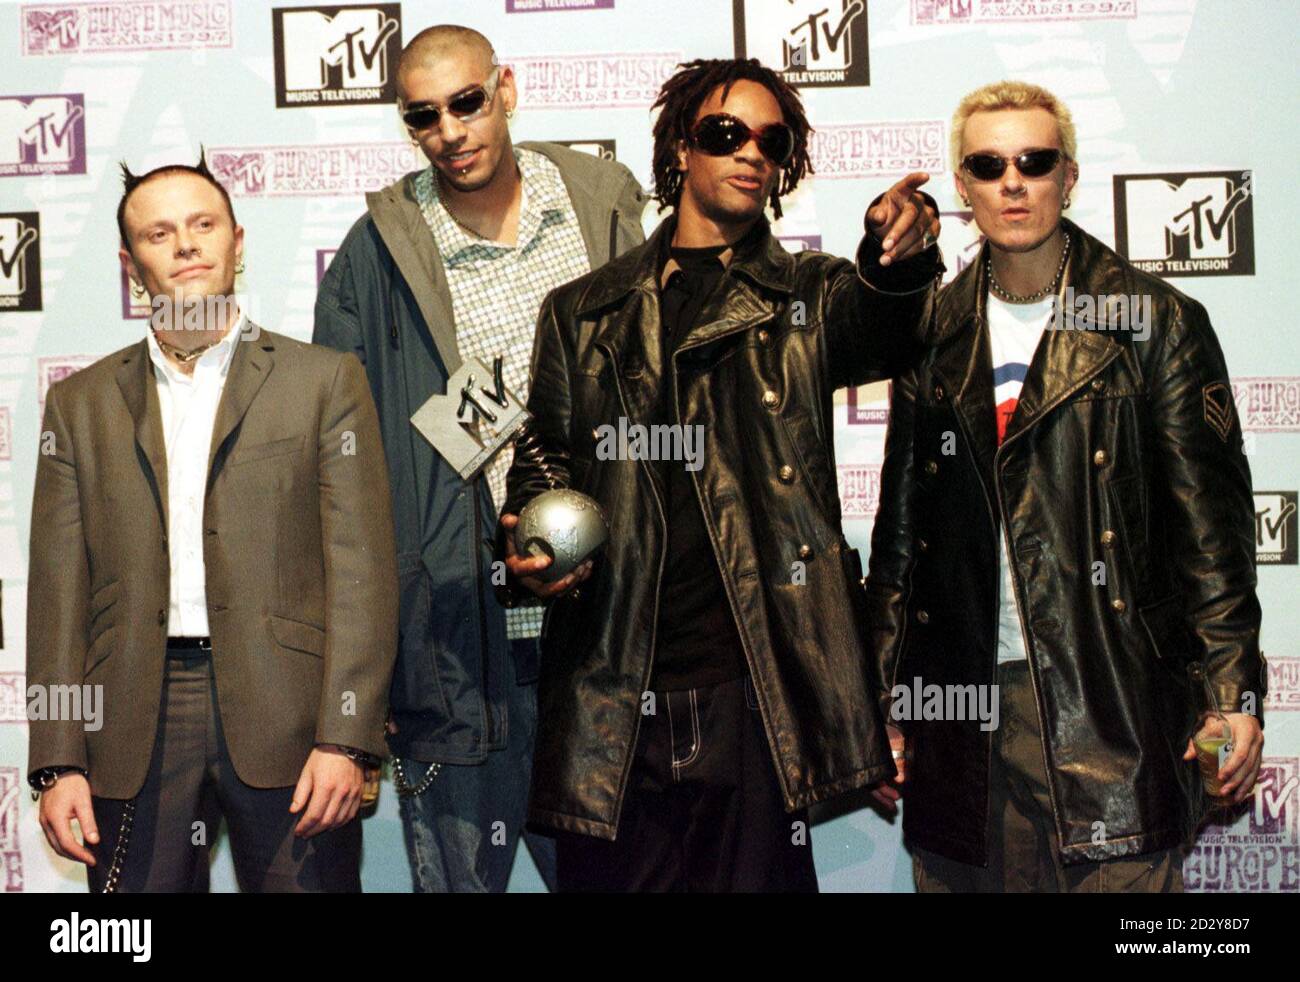 Three-time winners The Prodigy, backstage at the MTV Europe Music Awards ceremony in Rotterdam where they wer presented with awards for Best Dance Act, Best Alternative Act and Best Video.   * (L-R) Keith Flint, Leeroy Thornhill, Maxim Reality (aka Keith Palmer) and Liam Howlett. Stock Photo